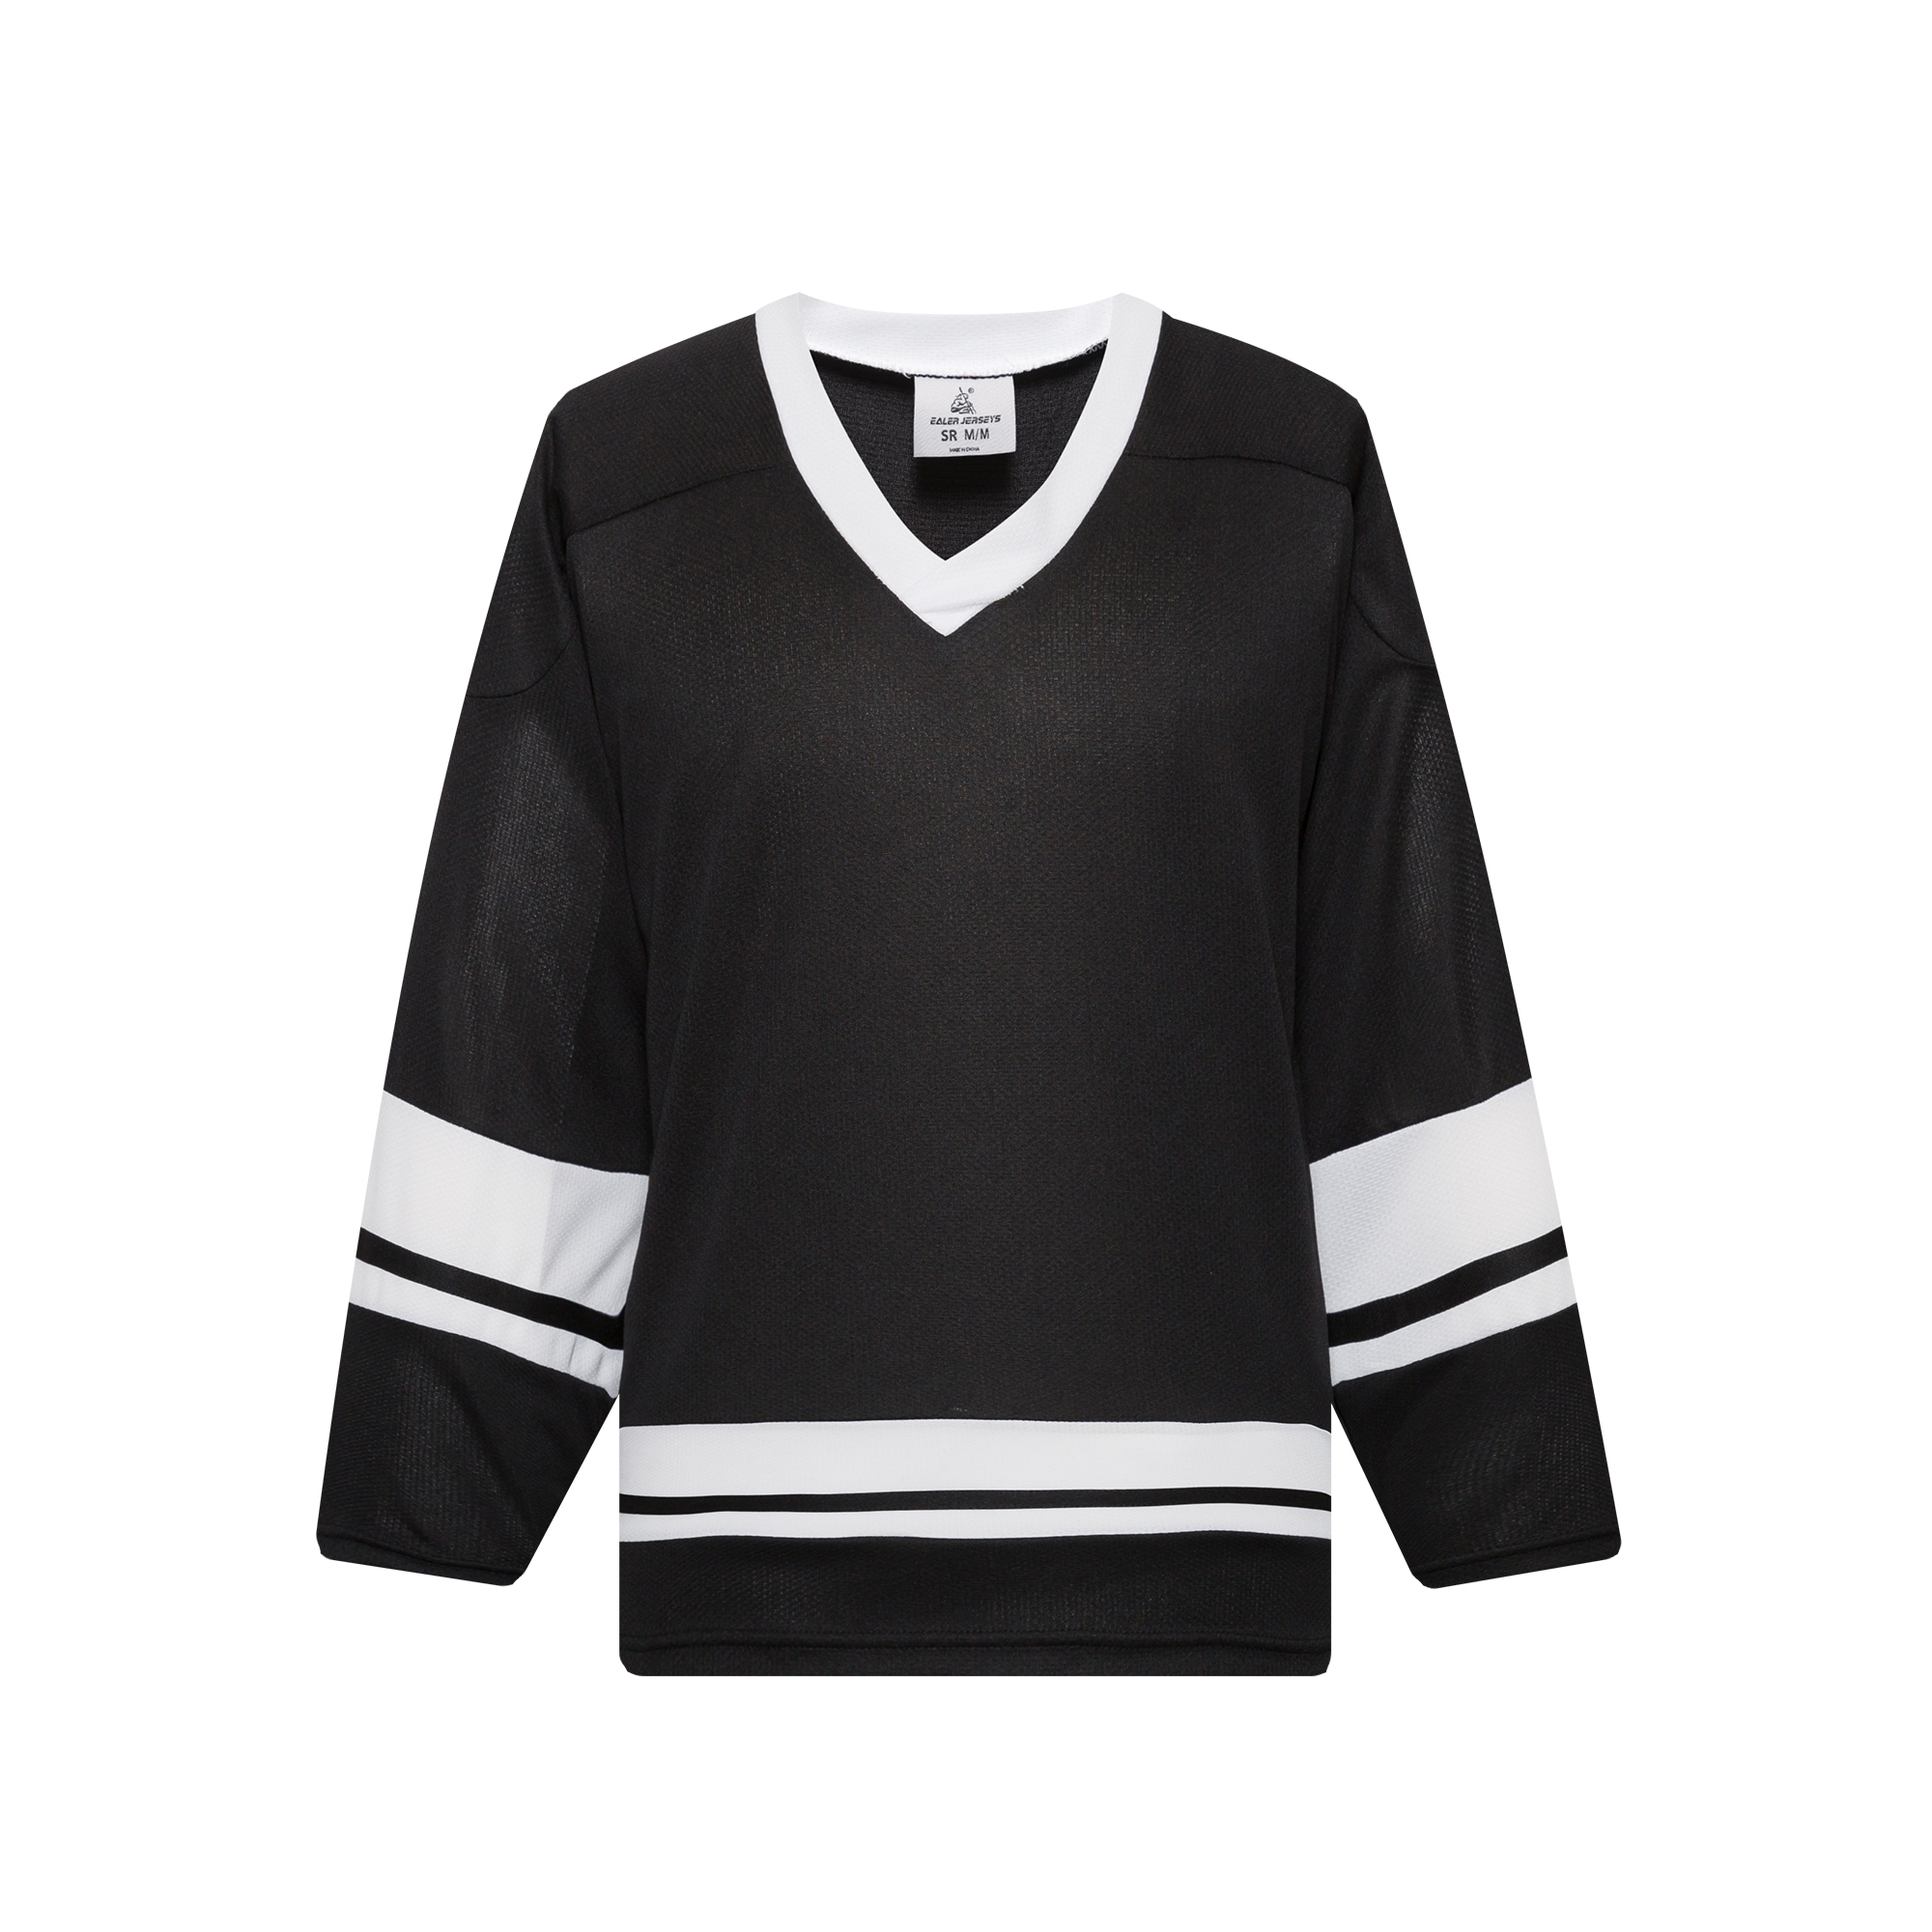 Senior and Junior Adult and Youth EALER H80 Series Blank Ice Hockey Practice Jersey for Men and Boy 